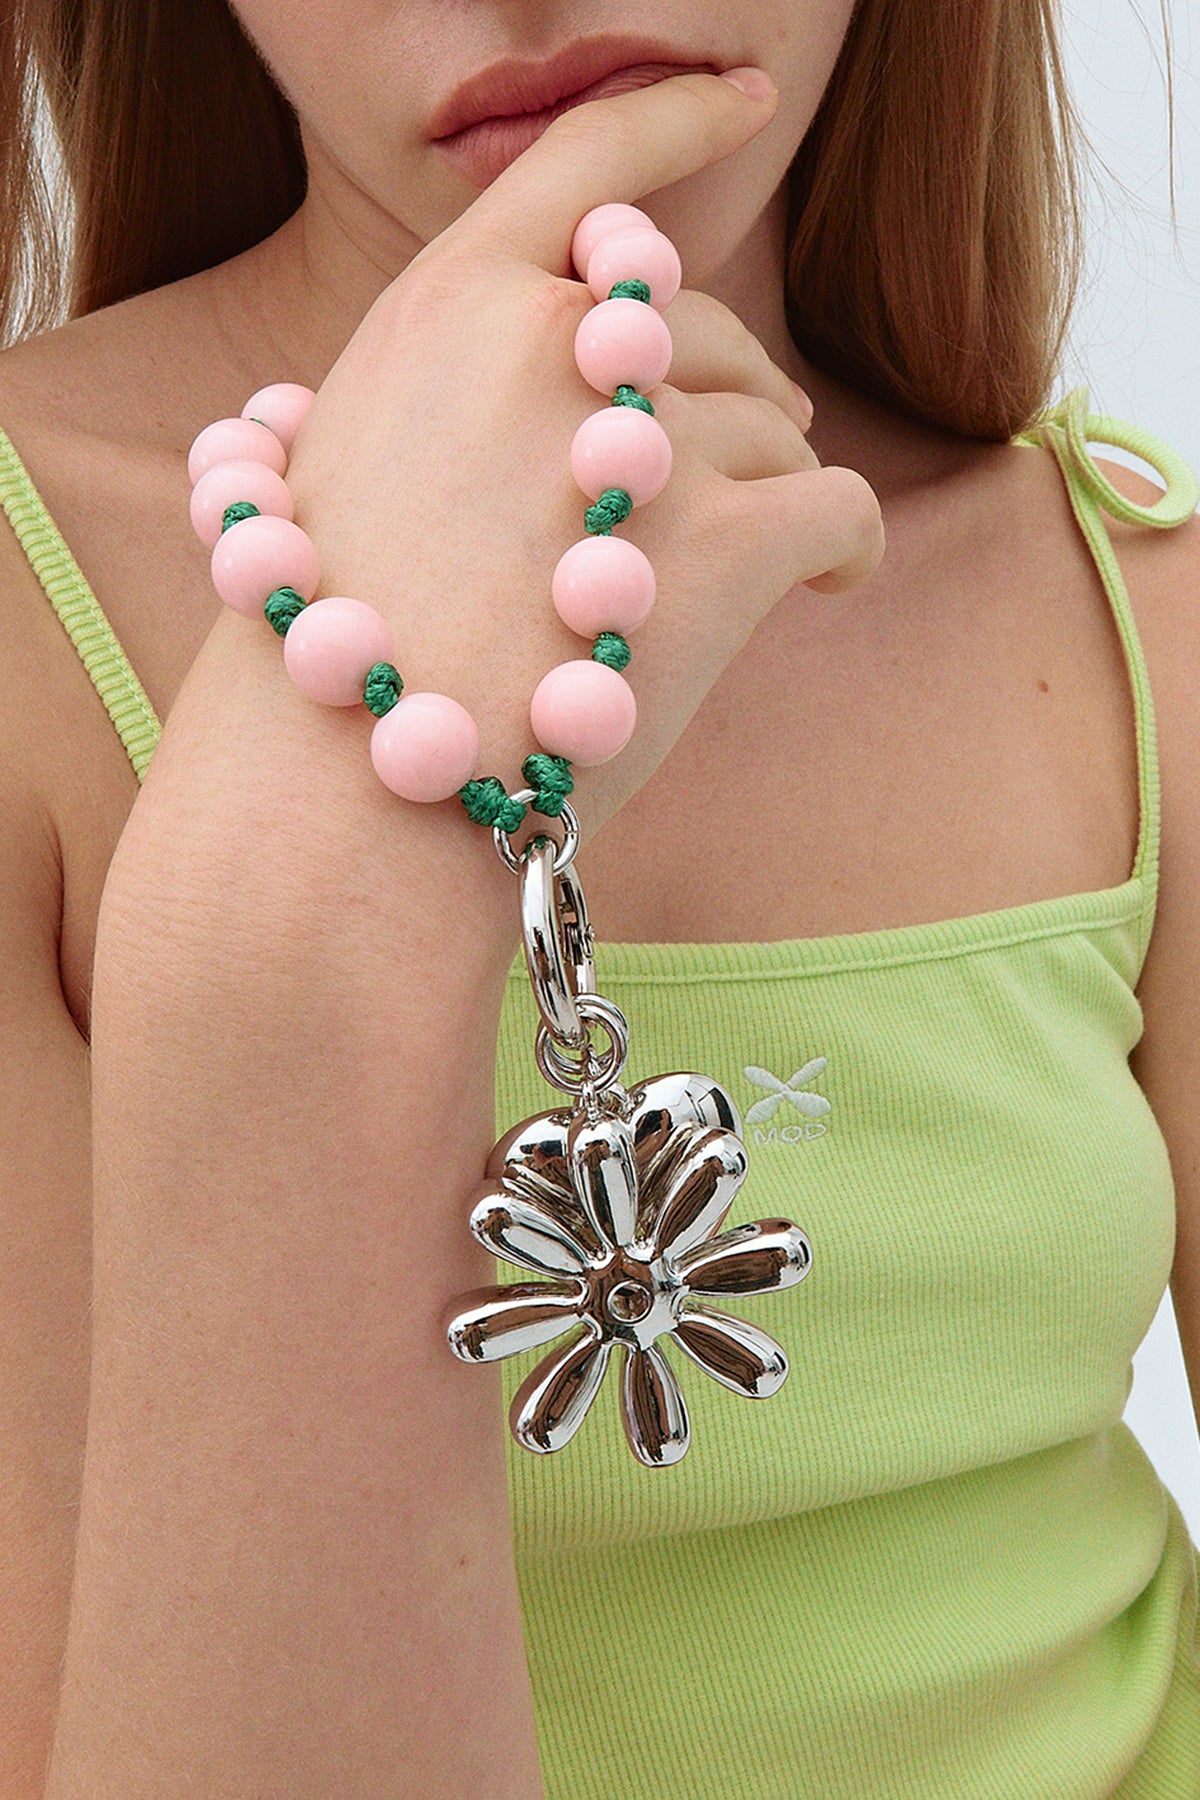 Mardi x ME Bloom Daisy Phone Charm In Baby Pink & Green